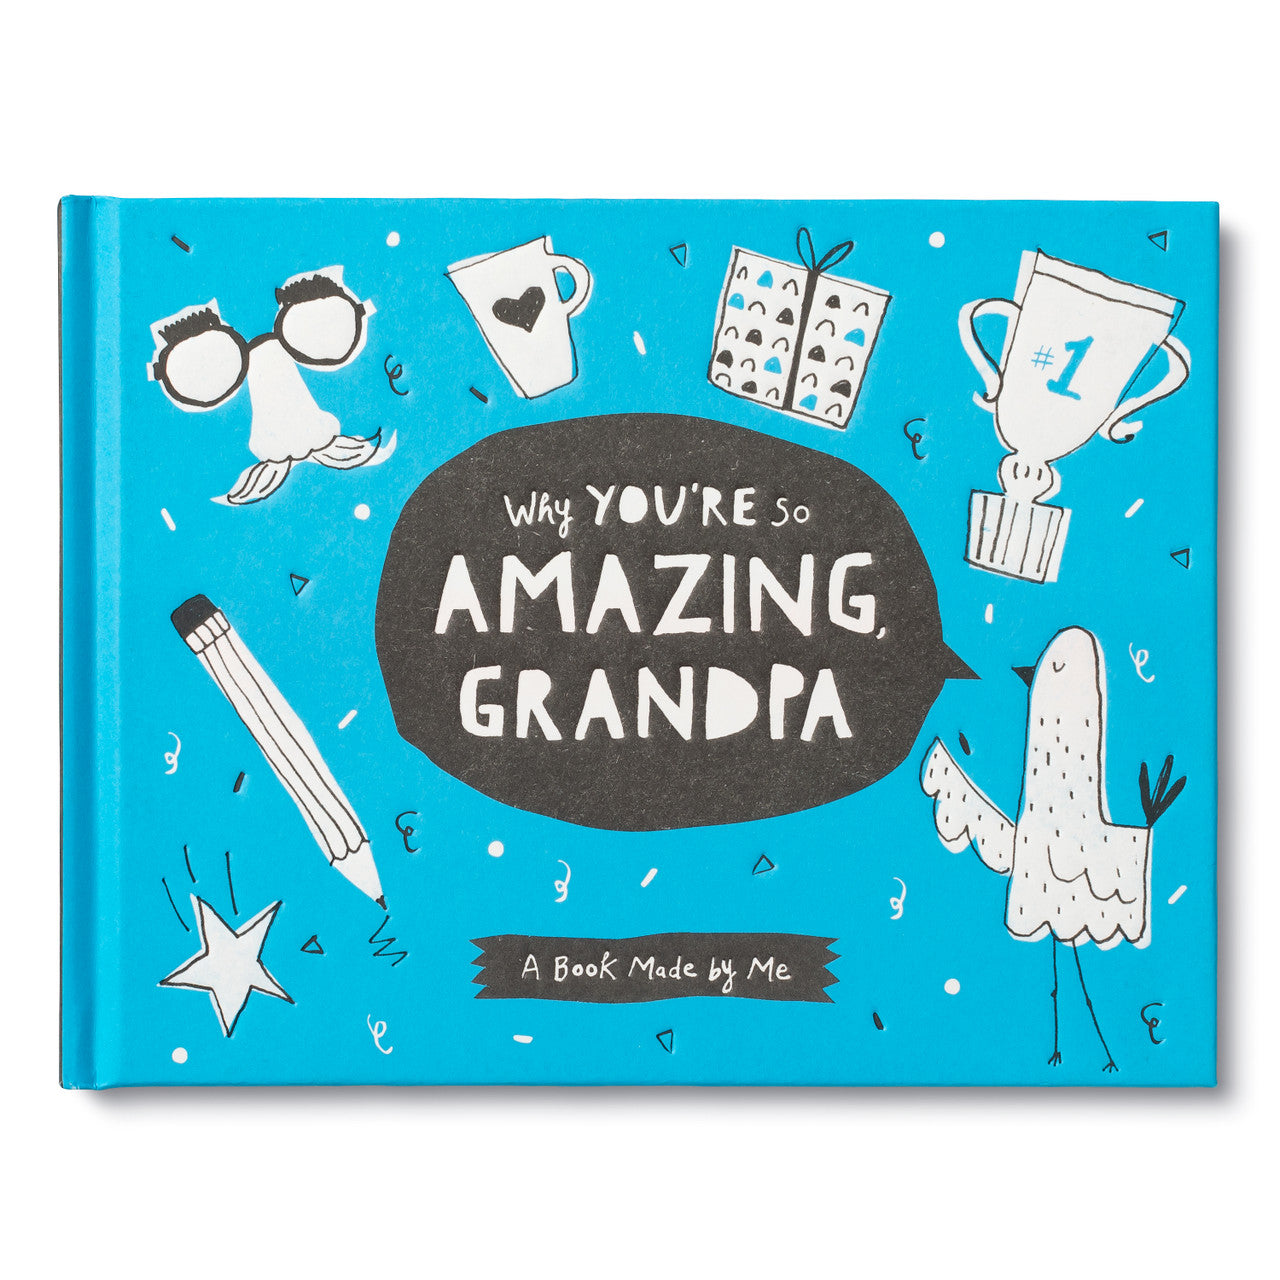 Grandpa　Activity　Amazing　Why　You're　So　Love　Book　–　Labour　Of